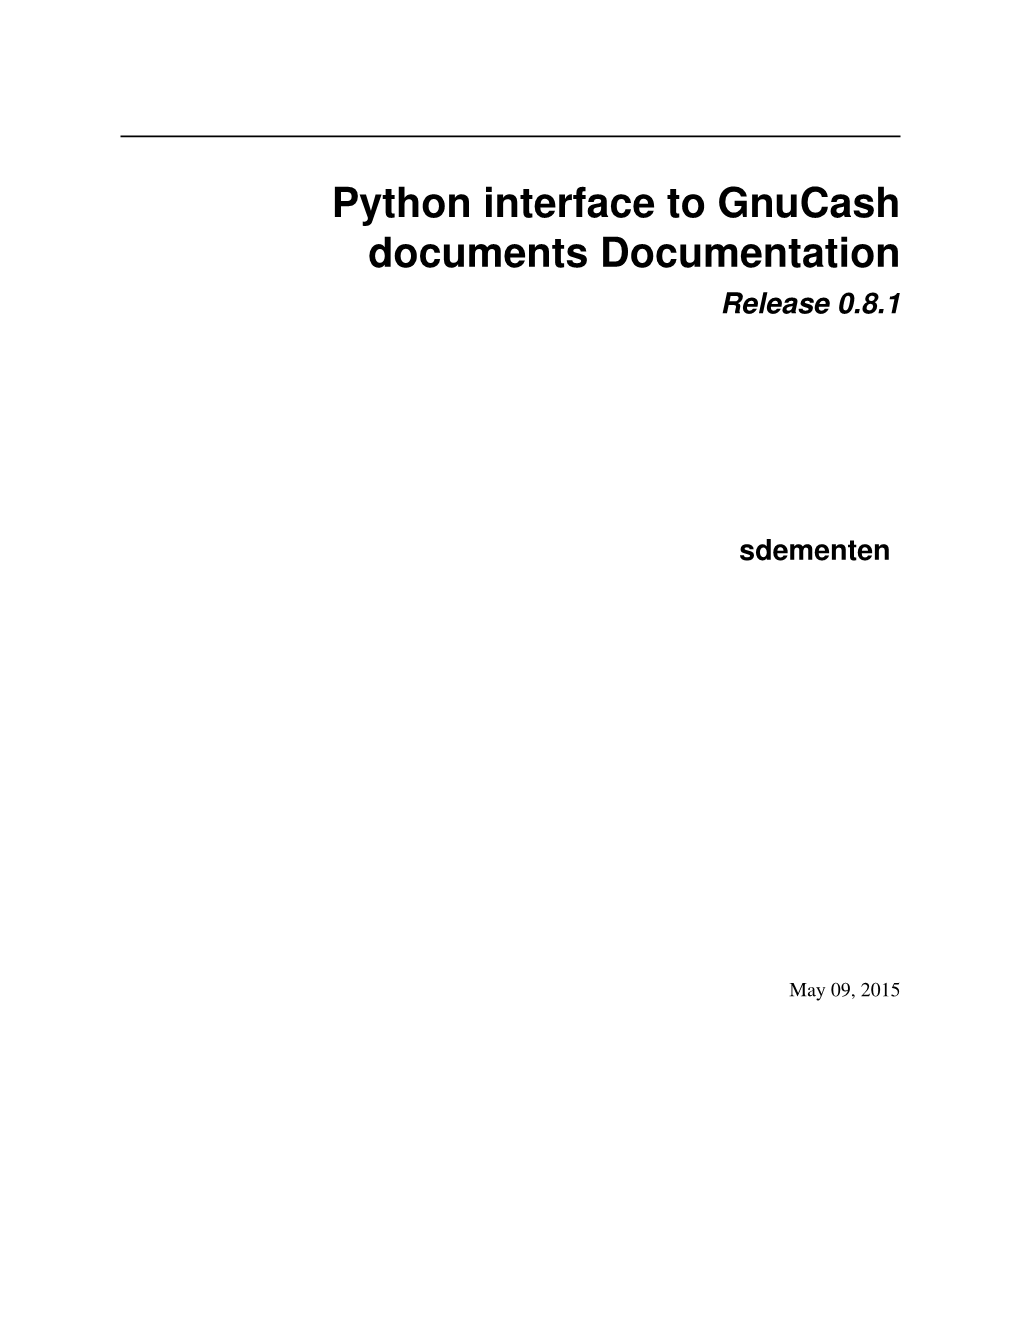 Python Interface to Gnucash Documents Documentation Release 0.8.1